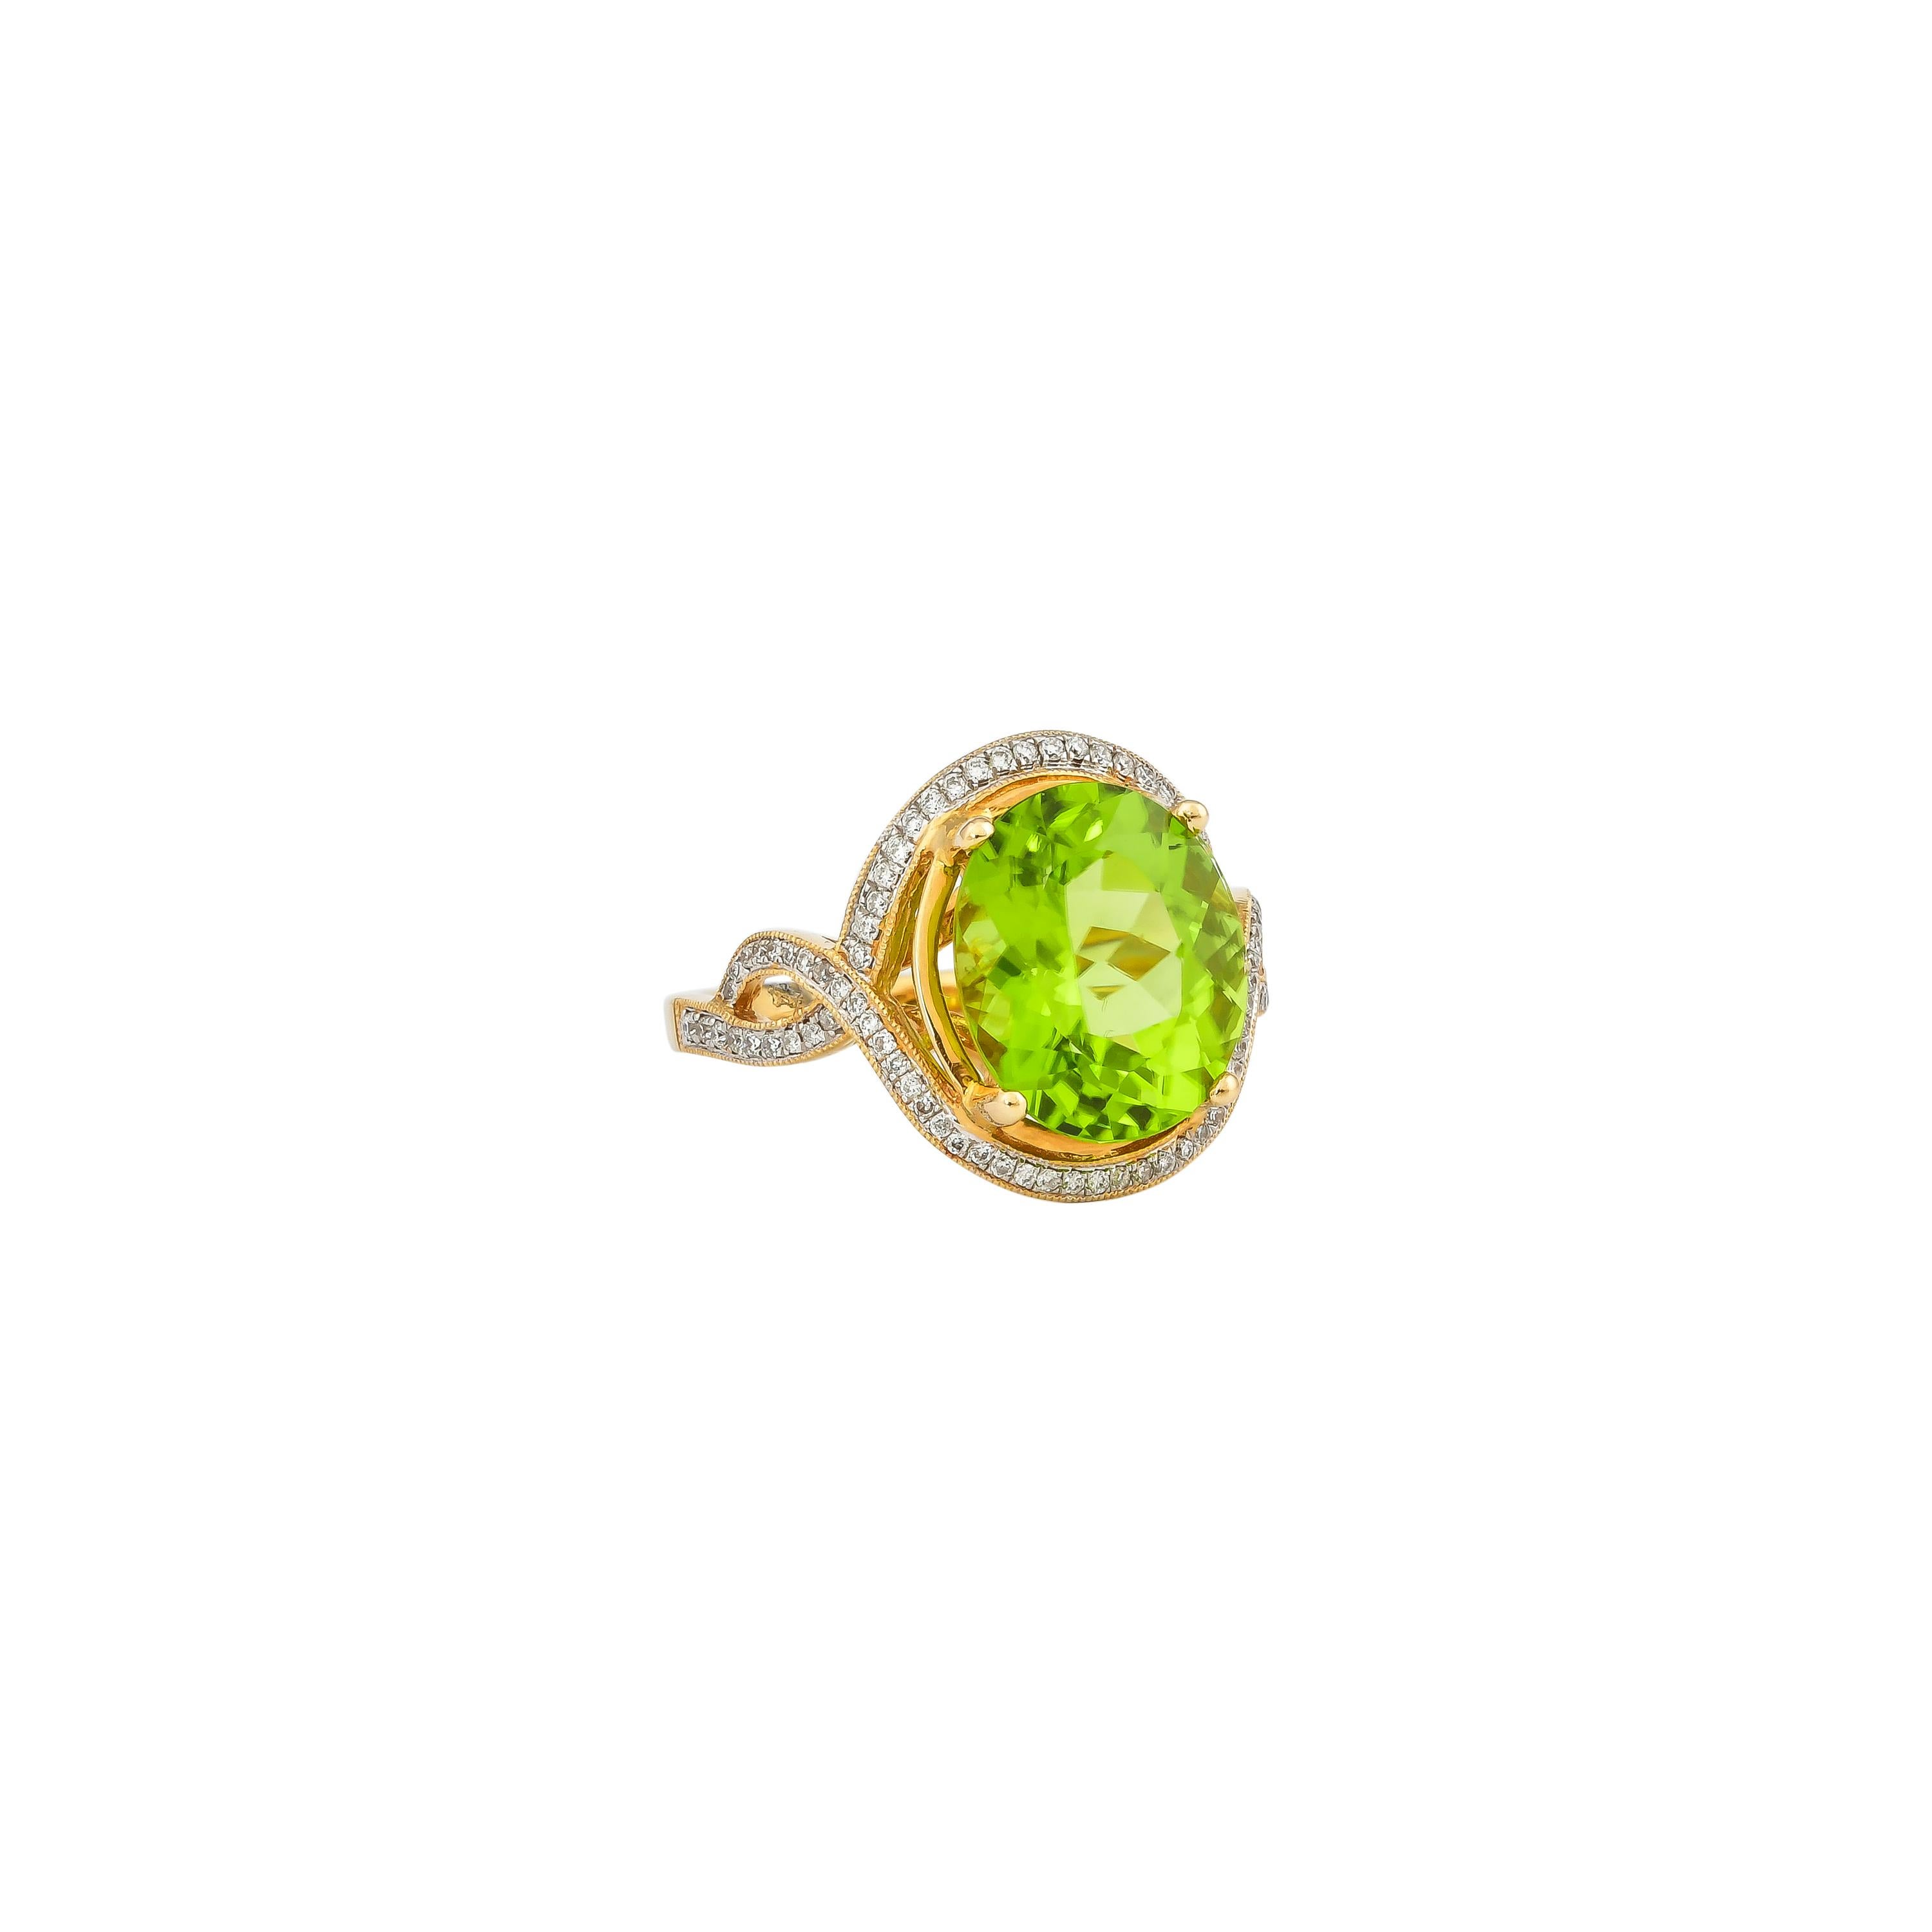 This collection features an array of pretty peridot rings! Accented with diamonds these rings are made in yellow gold and present a vibrant and fresh look. 

Classic peridot ring in 18K yellow gold with diamonds. 

Peridot: 5.02 carat oval